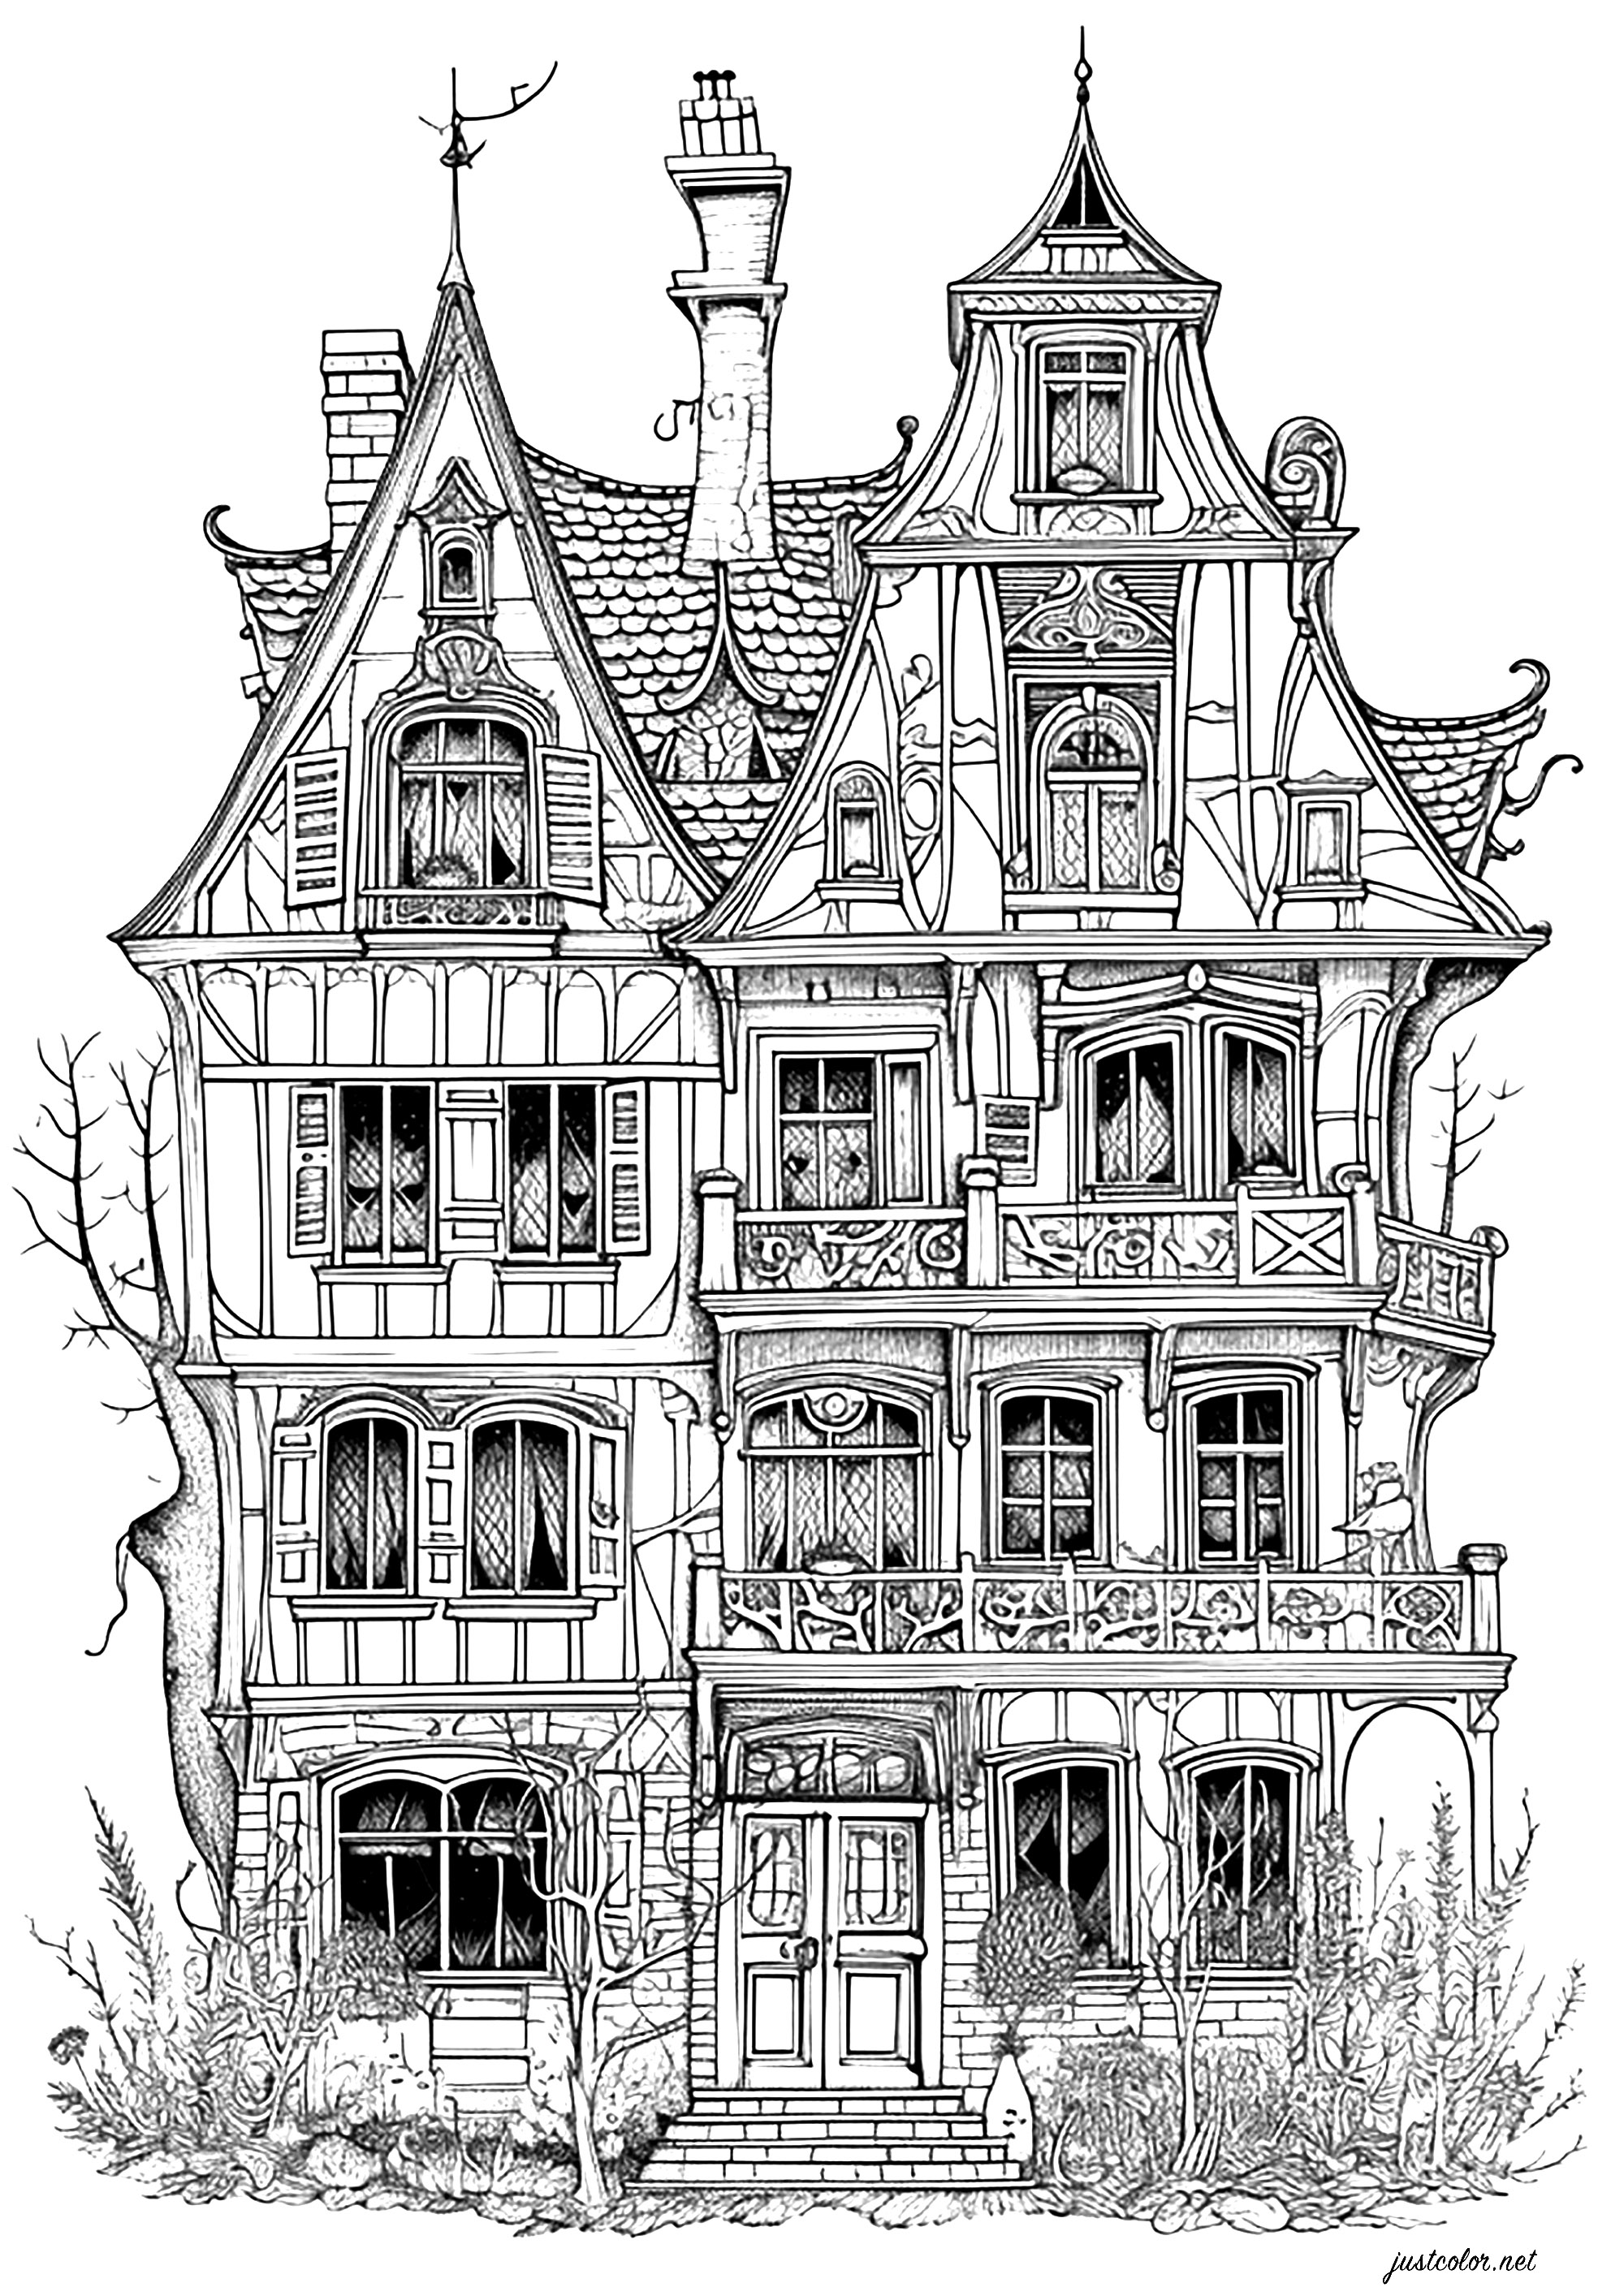 Victorian House Coloring Poster - Large Coloring Posters